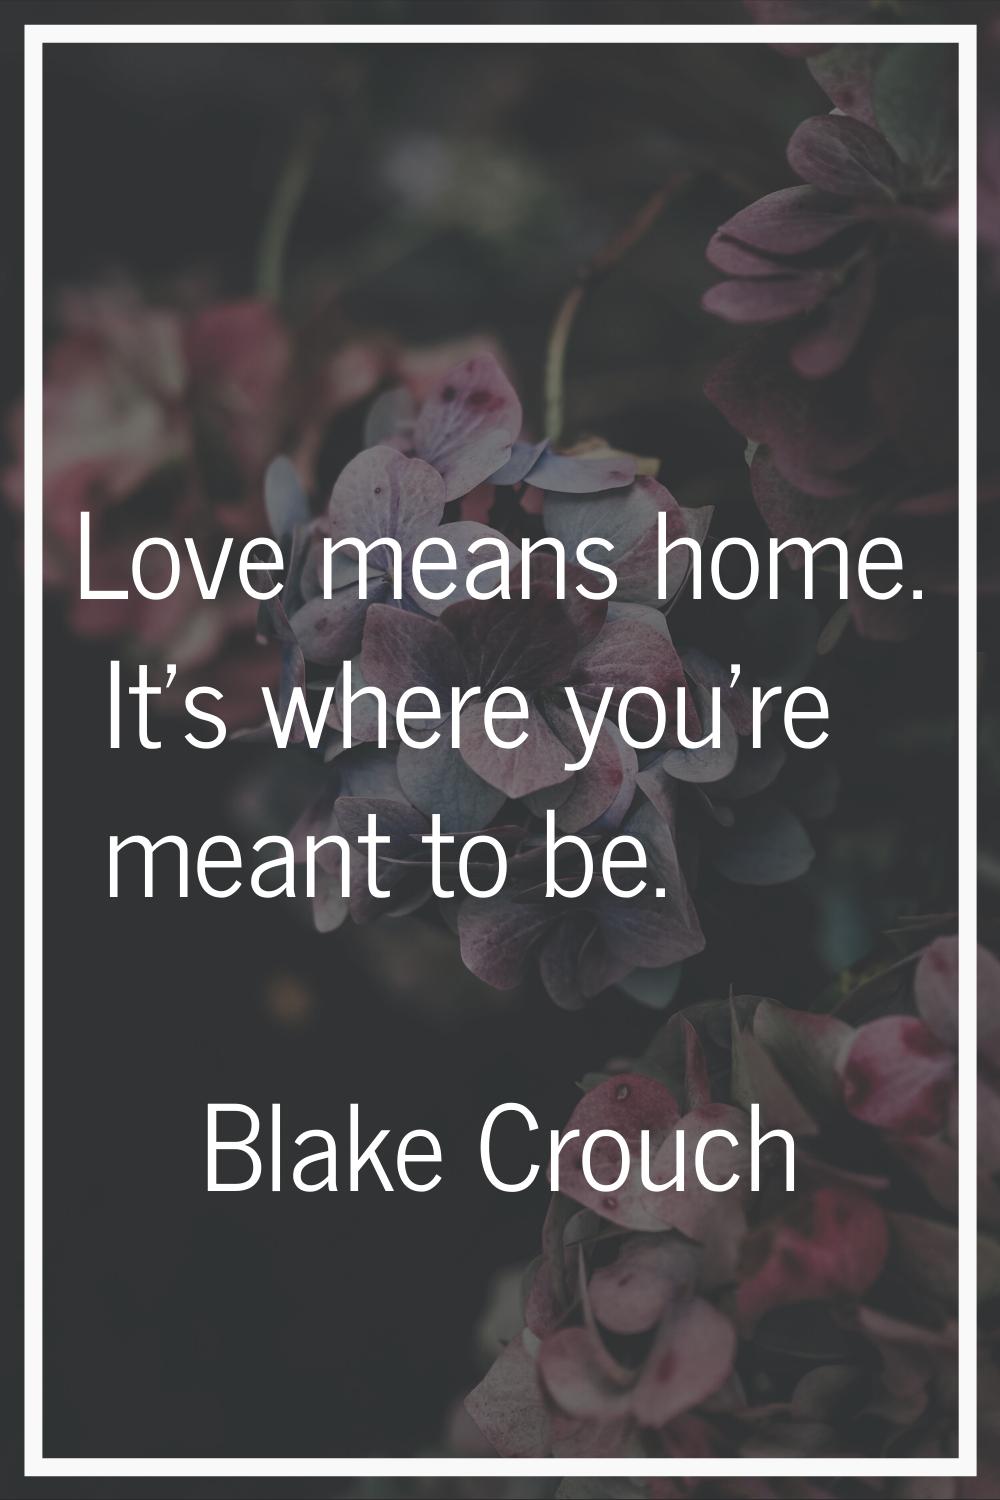 Love means home. It's where you're meant to be.